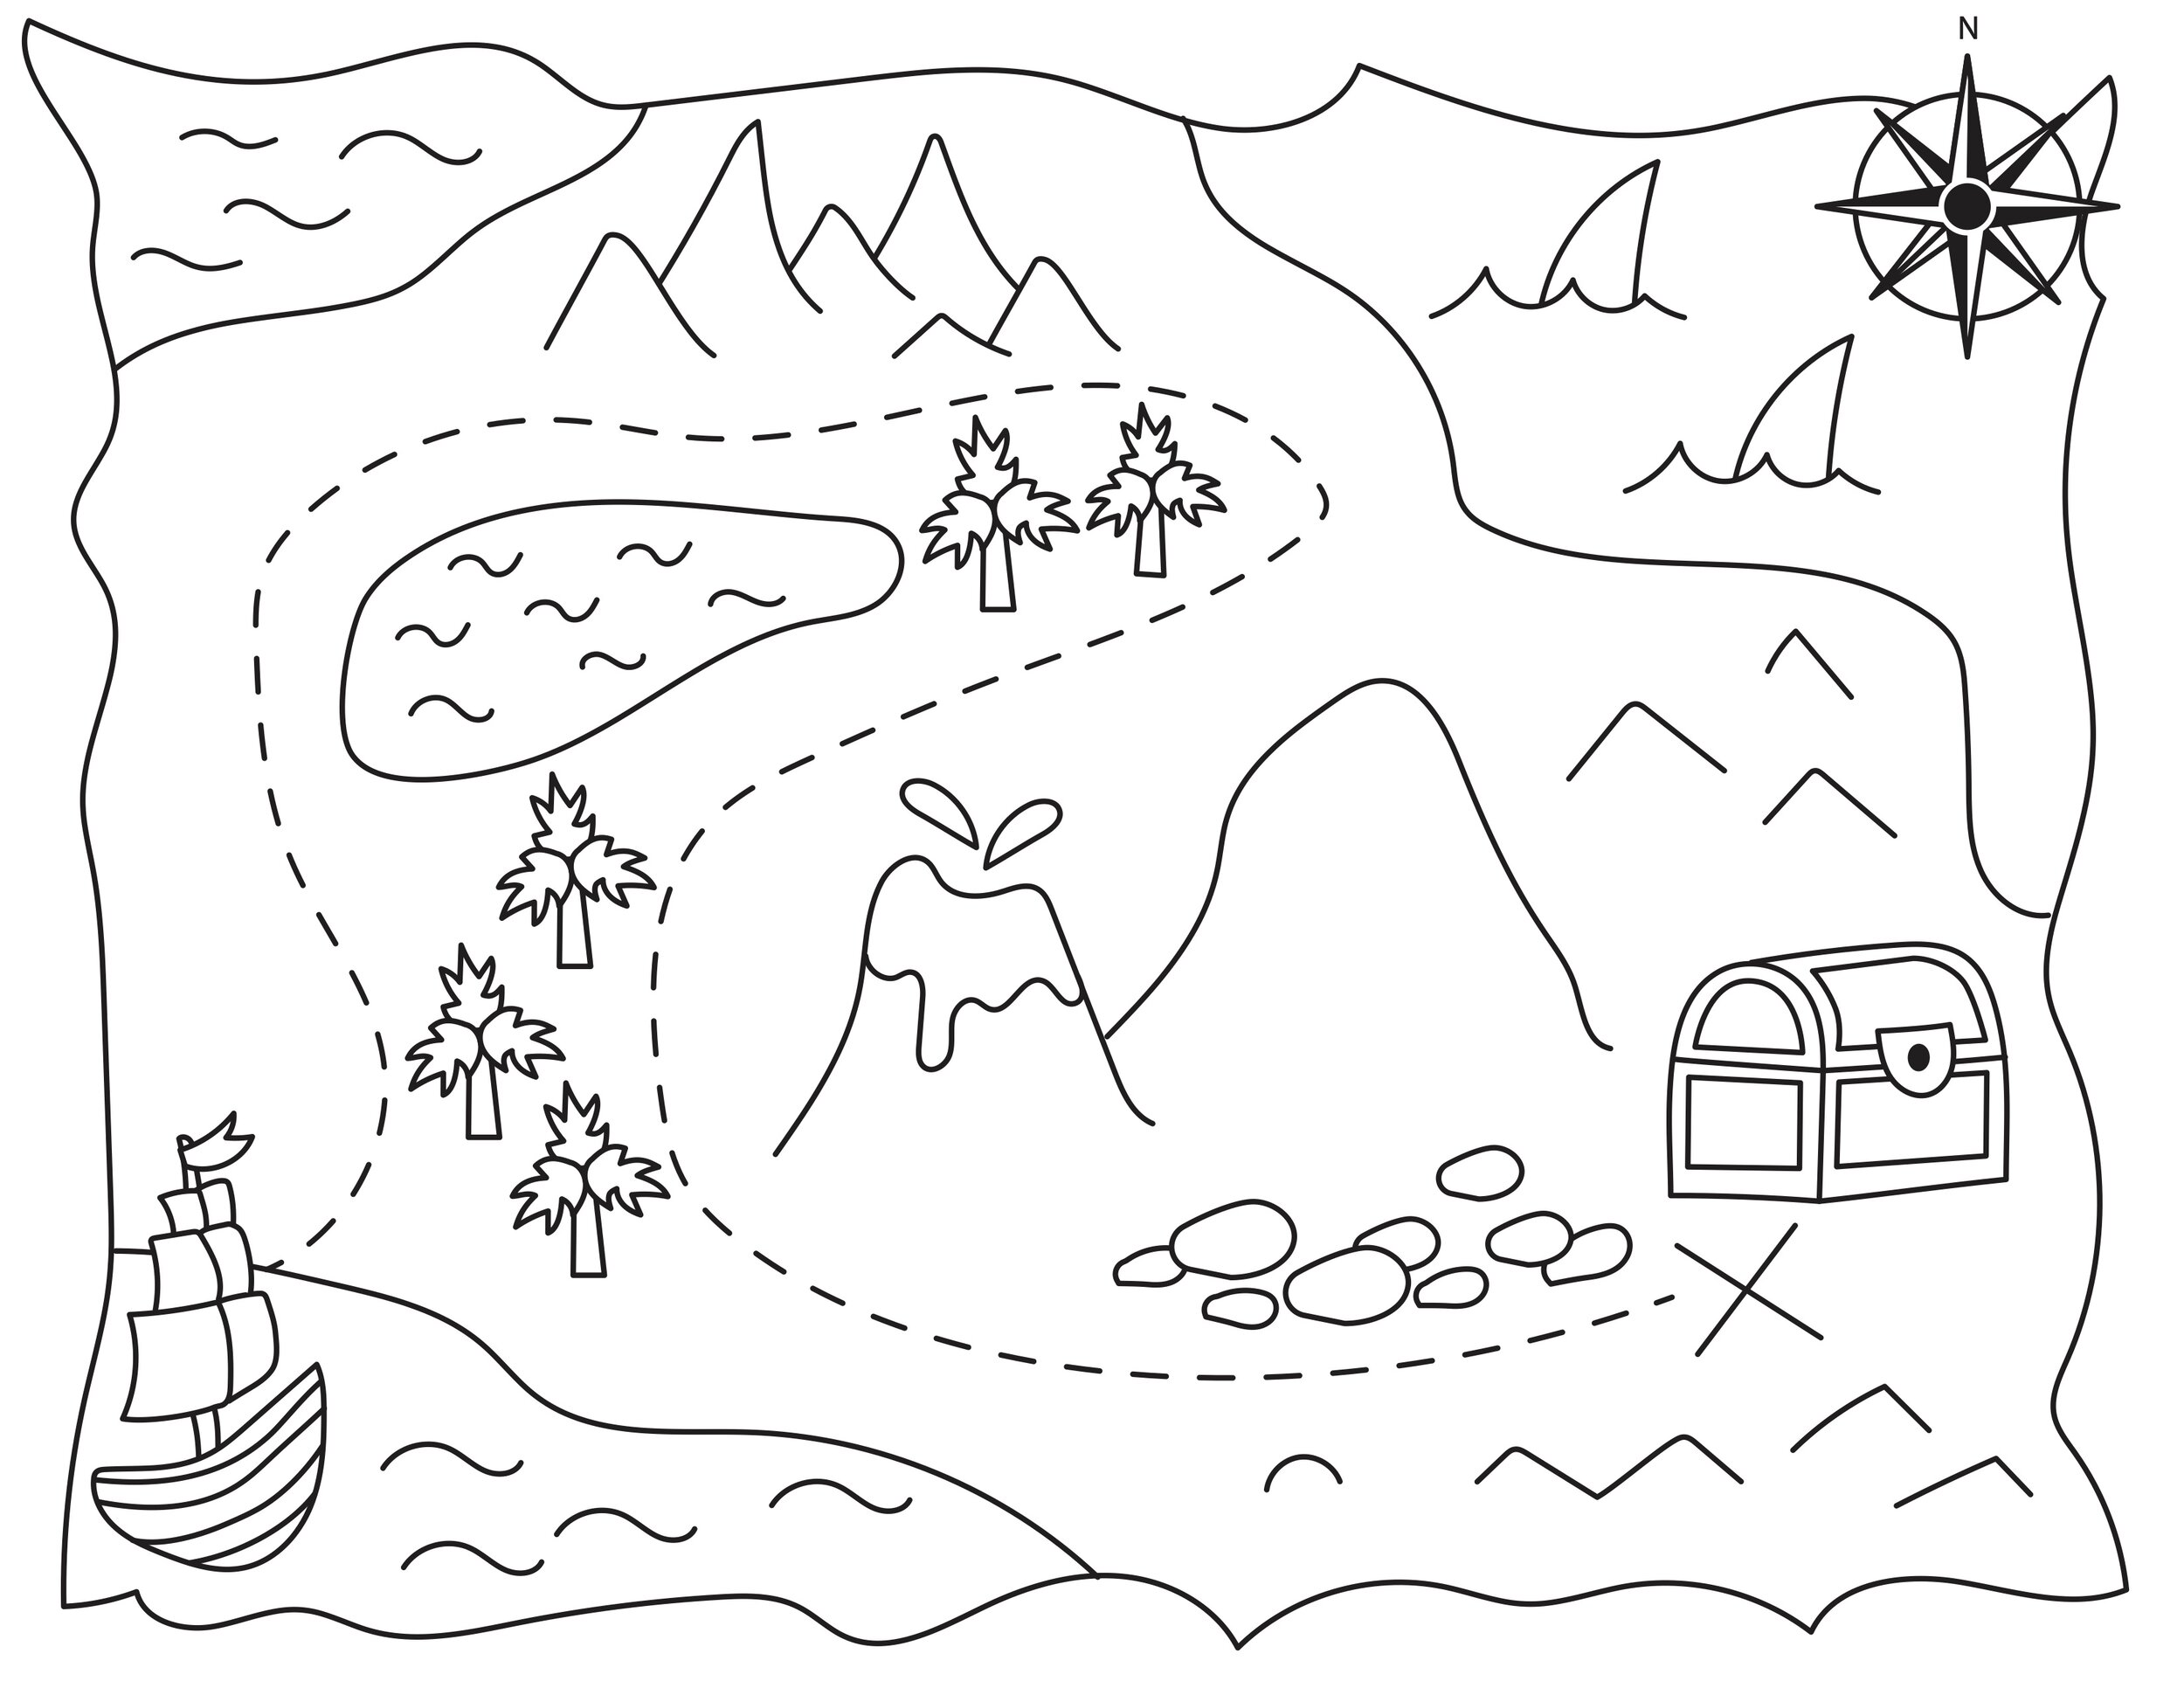 Pirate Treasure Map Coloring Coloring Pages